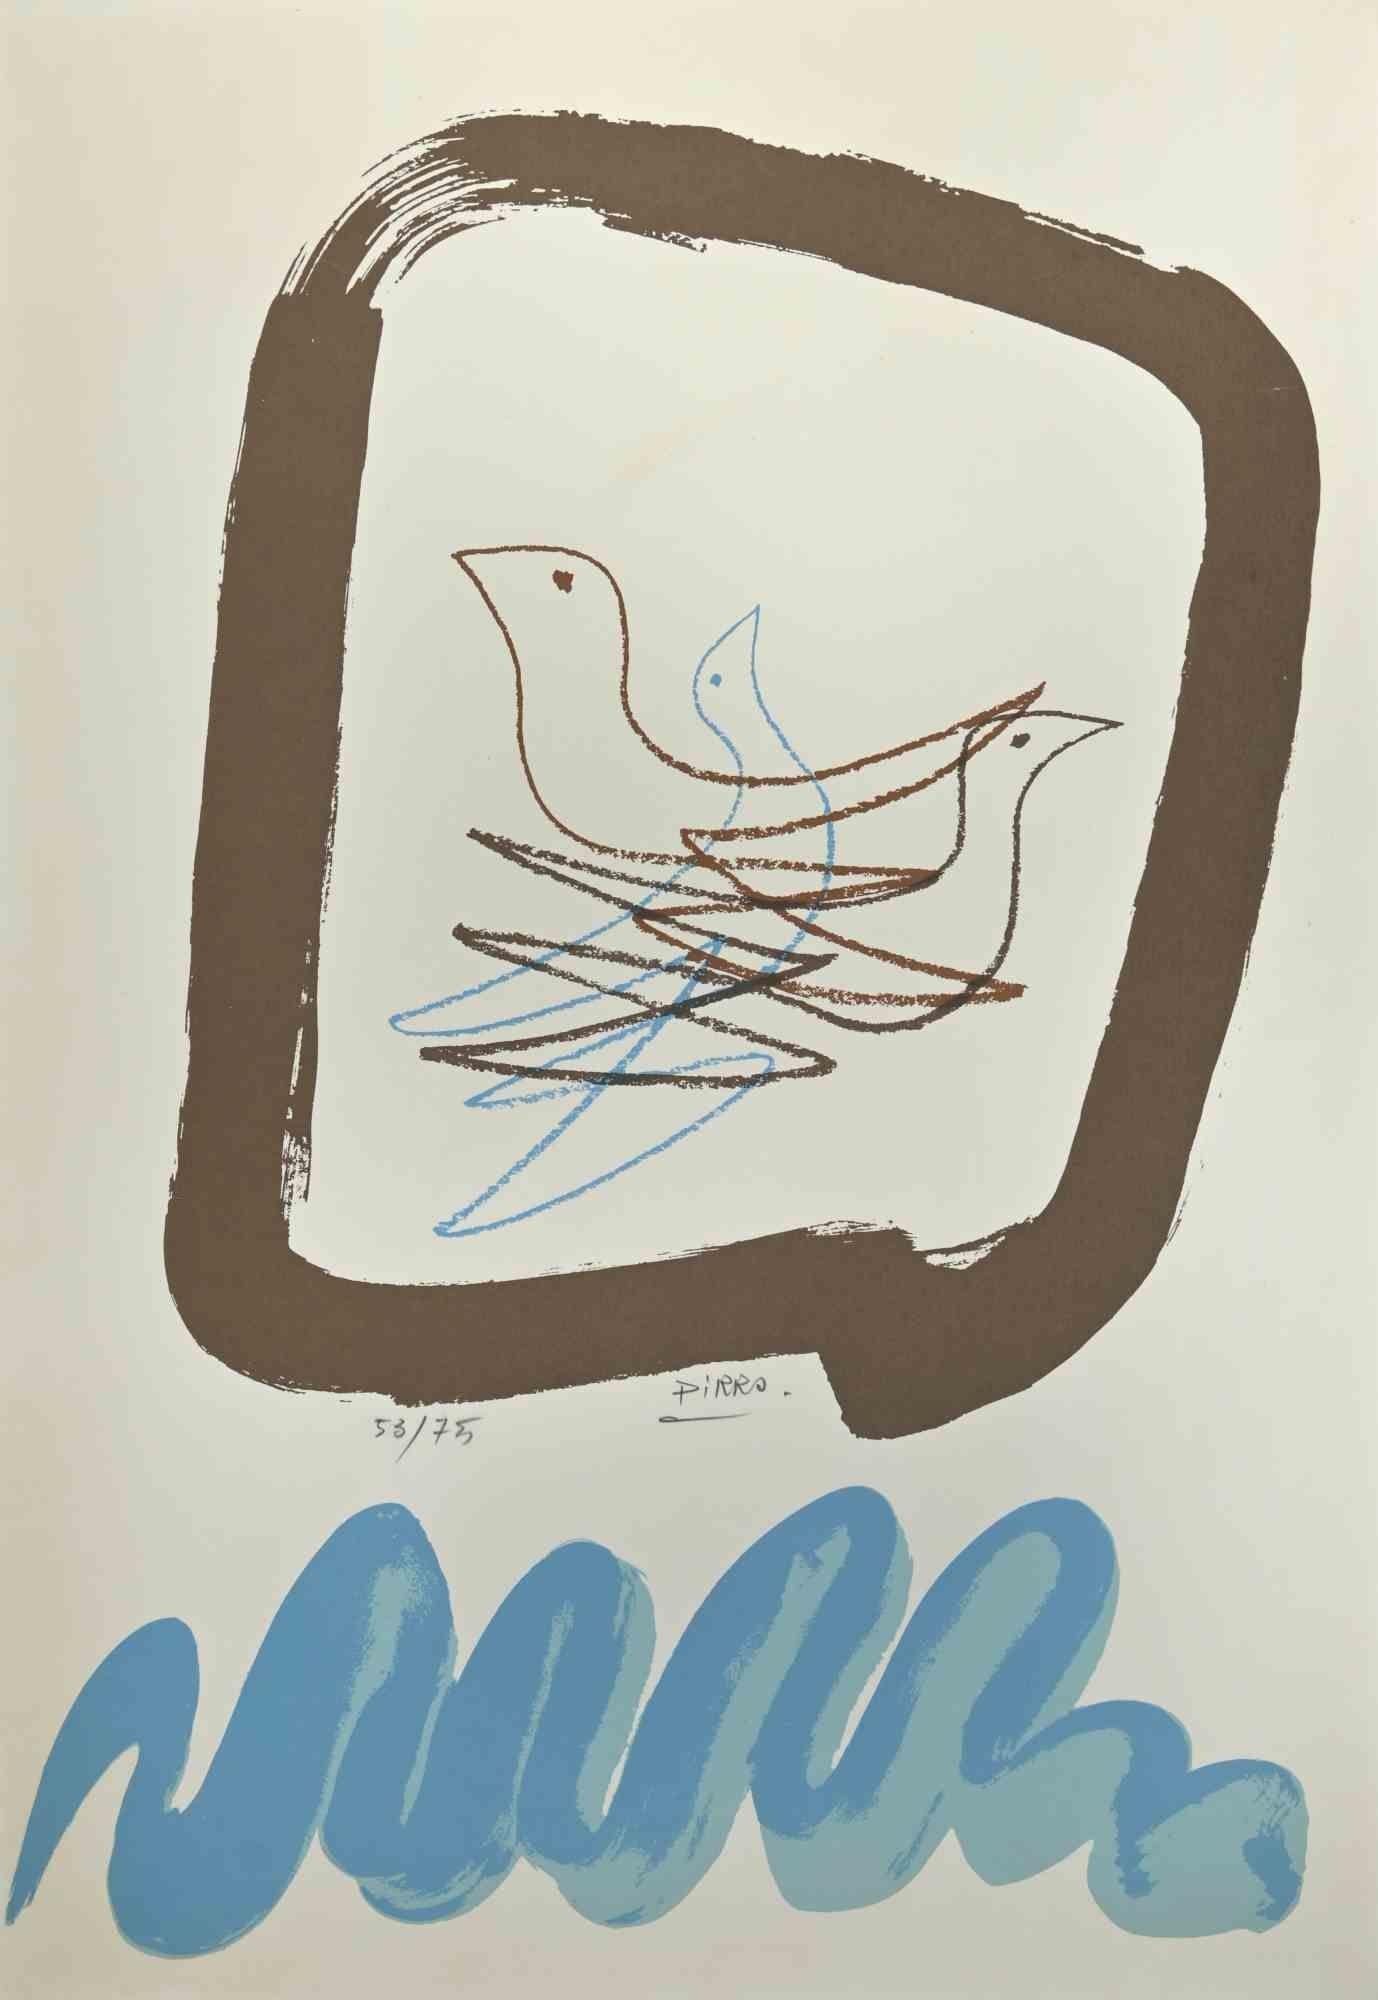 Birds is a lithograph realized by Marcello Pirro.  

Hand-signed, numbered, edition of 53/75 prints.

The state of preservation is very good.

The artwork represents a brilliant composition with birds nest in a brownish frame, down a water shape in